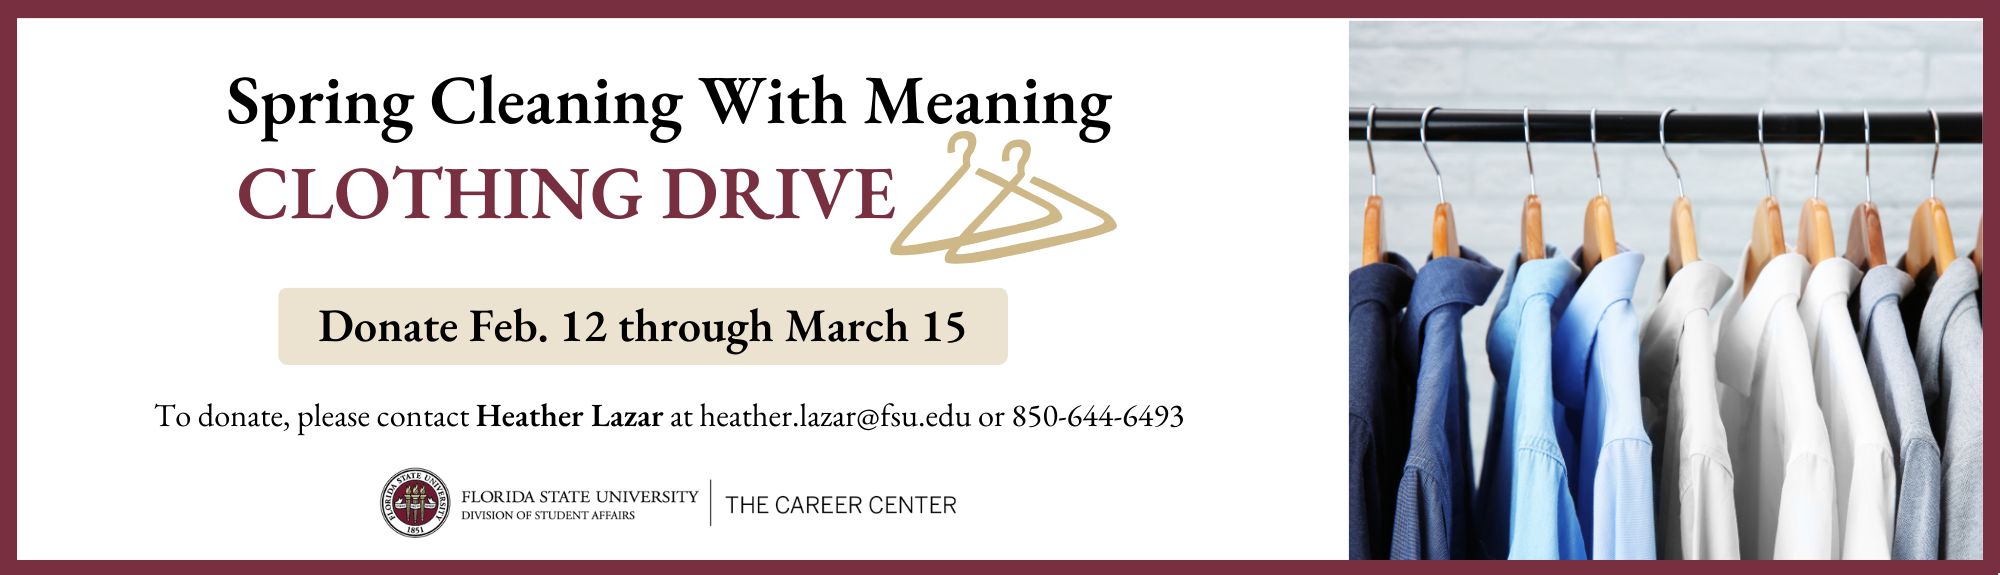 Spring Cleaning With Meaning Clothing Drive